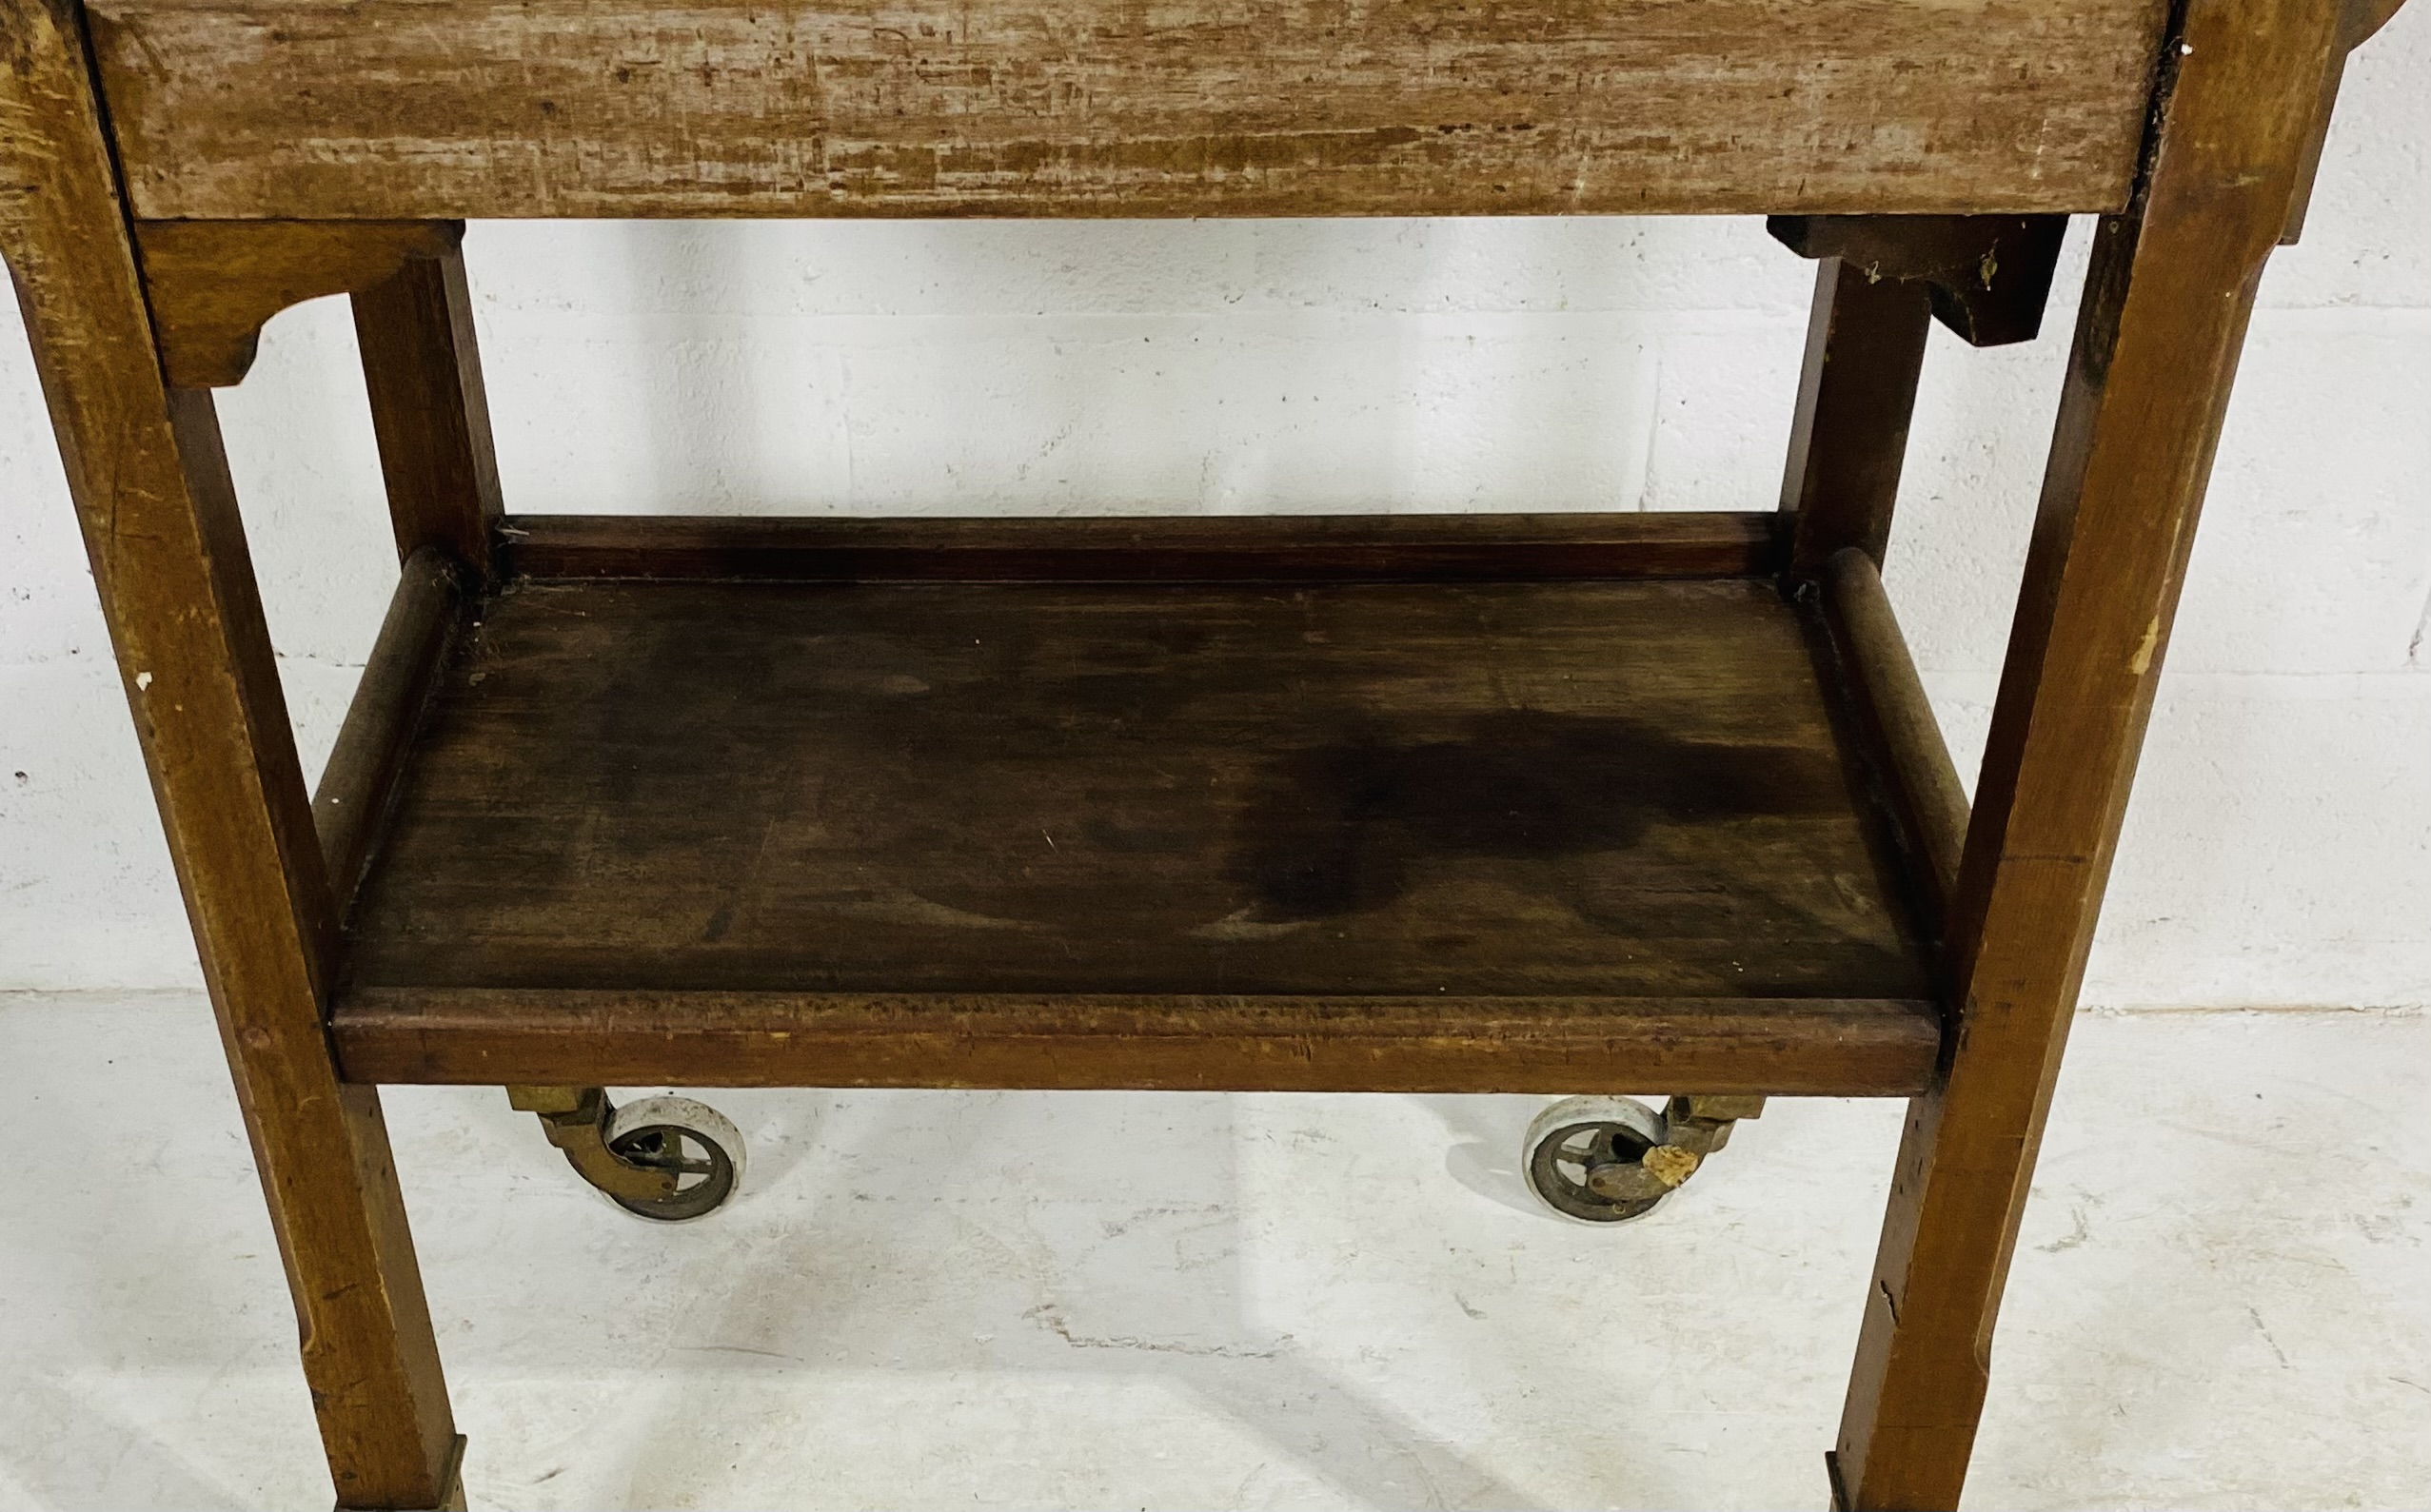 A Hotel & General Supply Company tea trolley with sliding tray and brass handle - Image 6 of 8